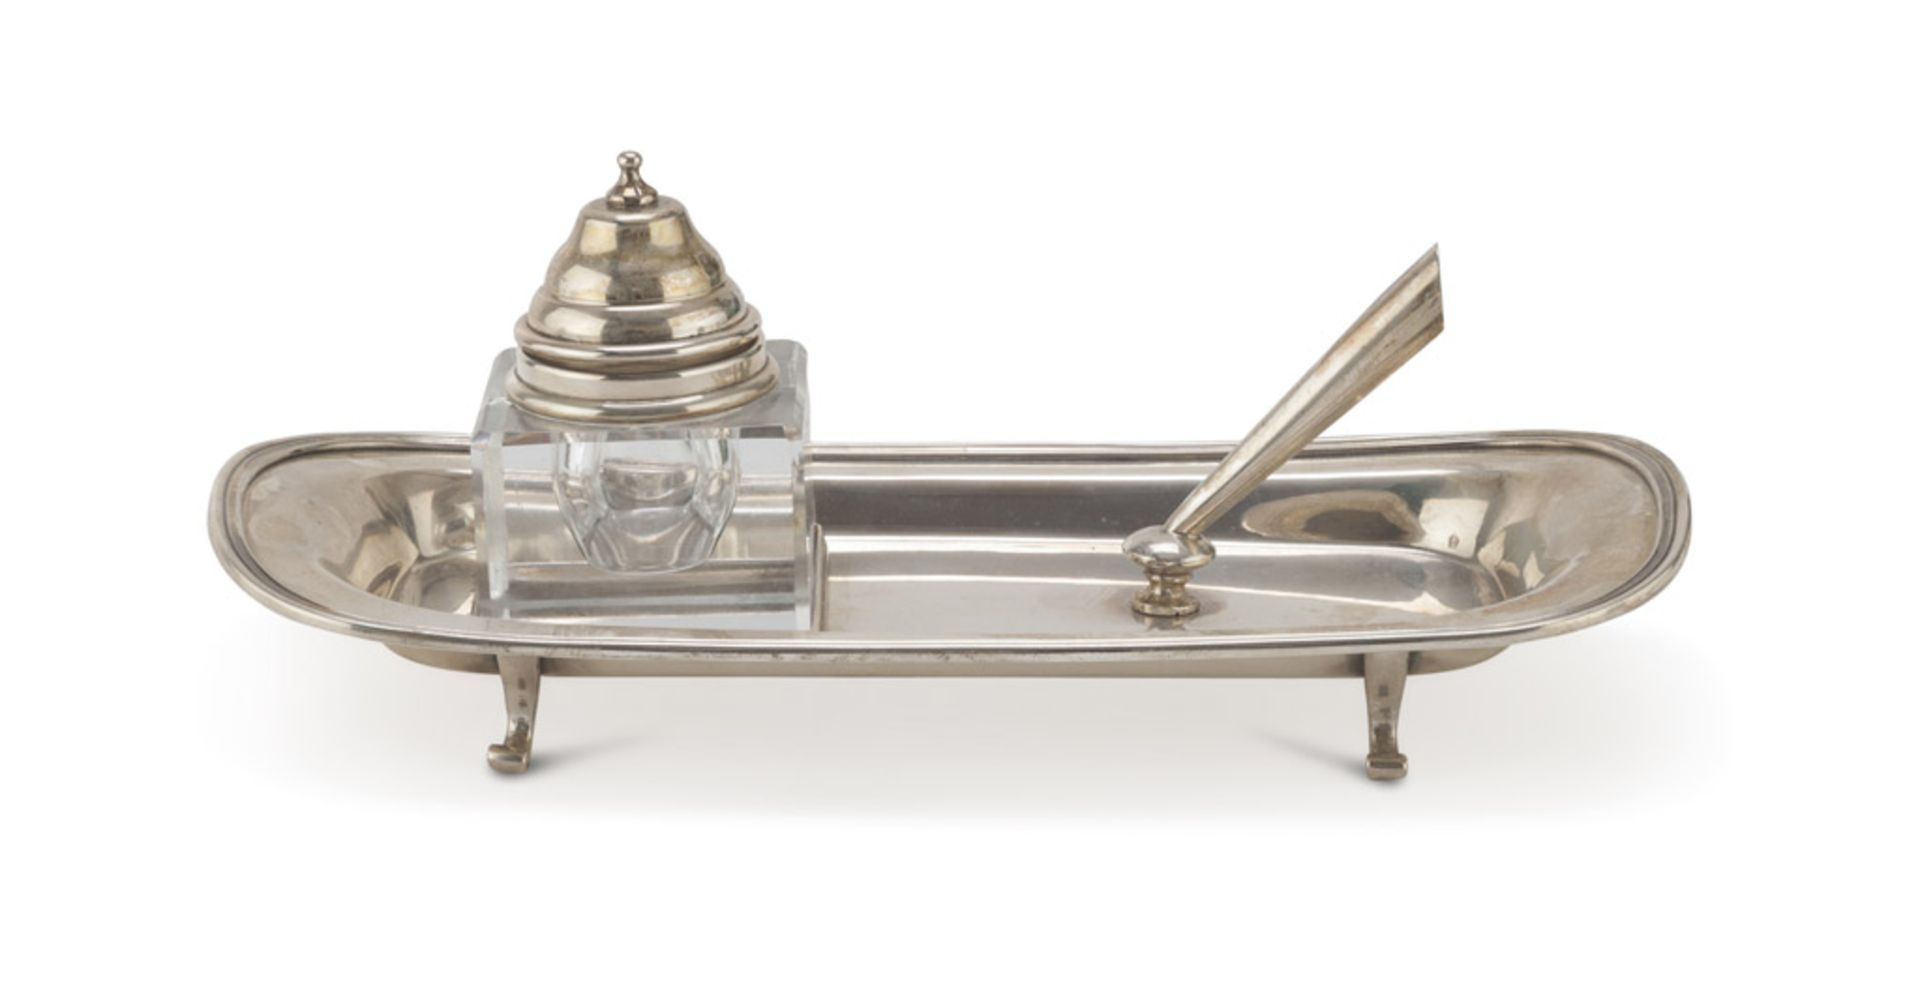 SMALL INKWELL IN SILVER, PUNCH MILAN POST 1968 Title 800/1000. Measures cm. 11 x 23 x 11, weight